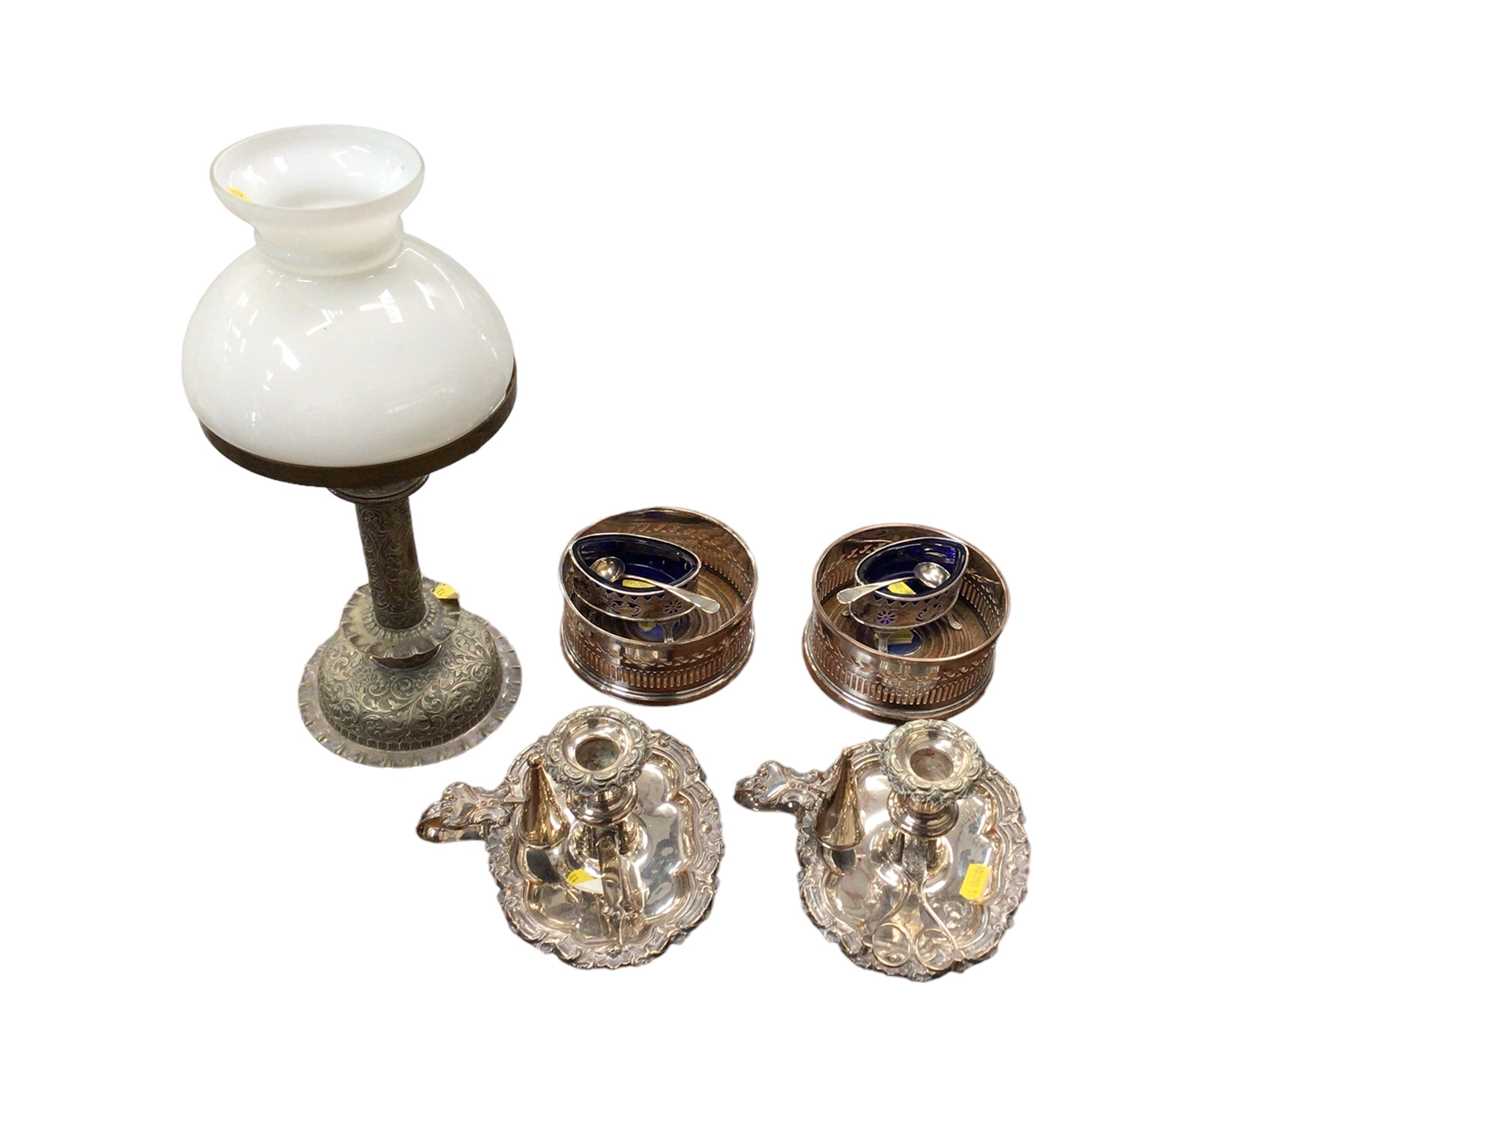 Lot 25 - Pair of Regency Old Sheffield Plate chamber sticks with snuffers, pair of antique silver plated decanter coasters, pair of Georgian silver plated salts with blue glass liners and a pair of Georgian...